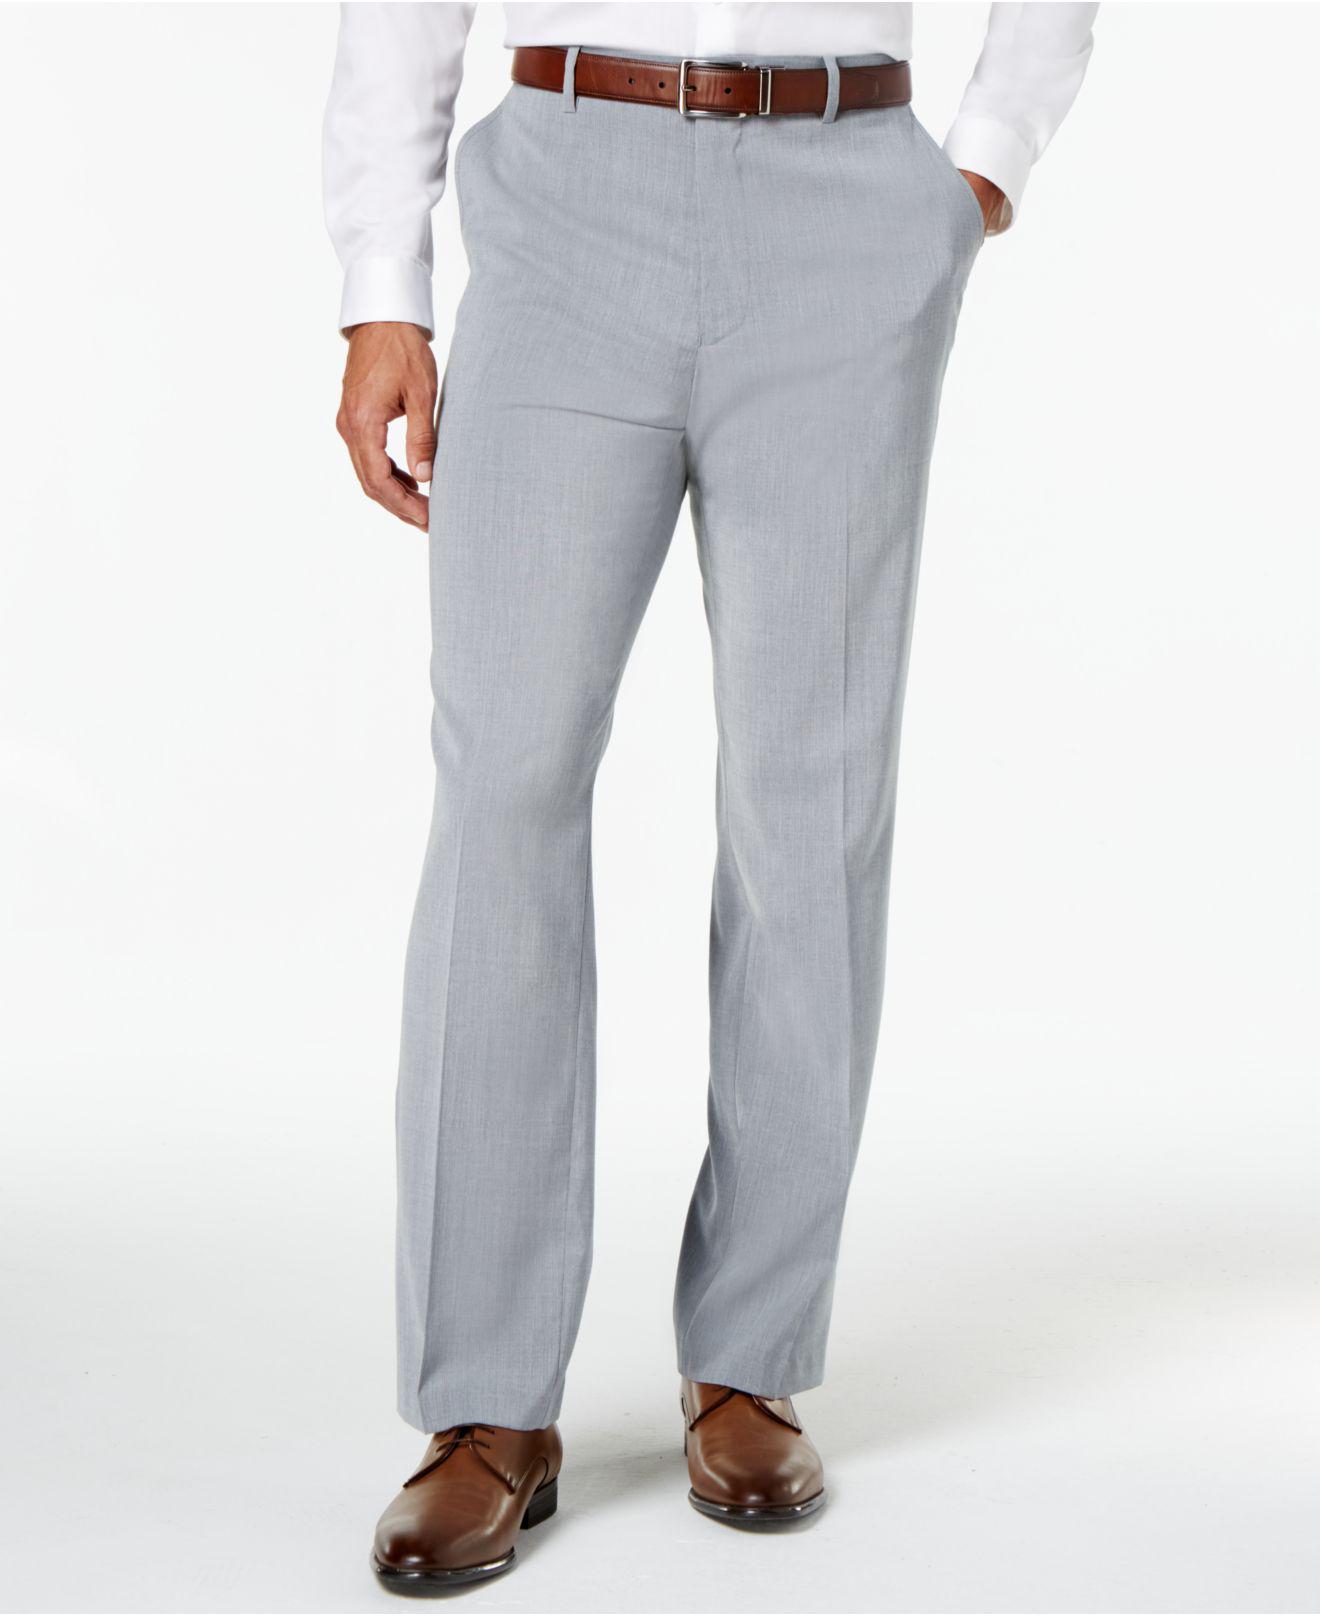 Lyst - Inc International Concepts Marrone Pants in Gray for Men